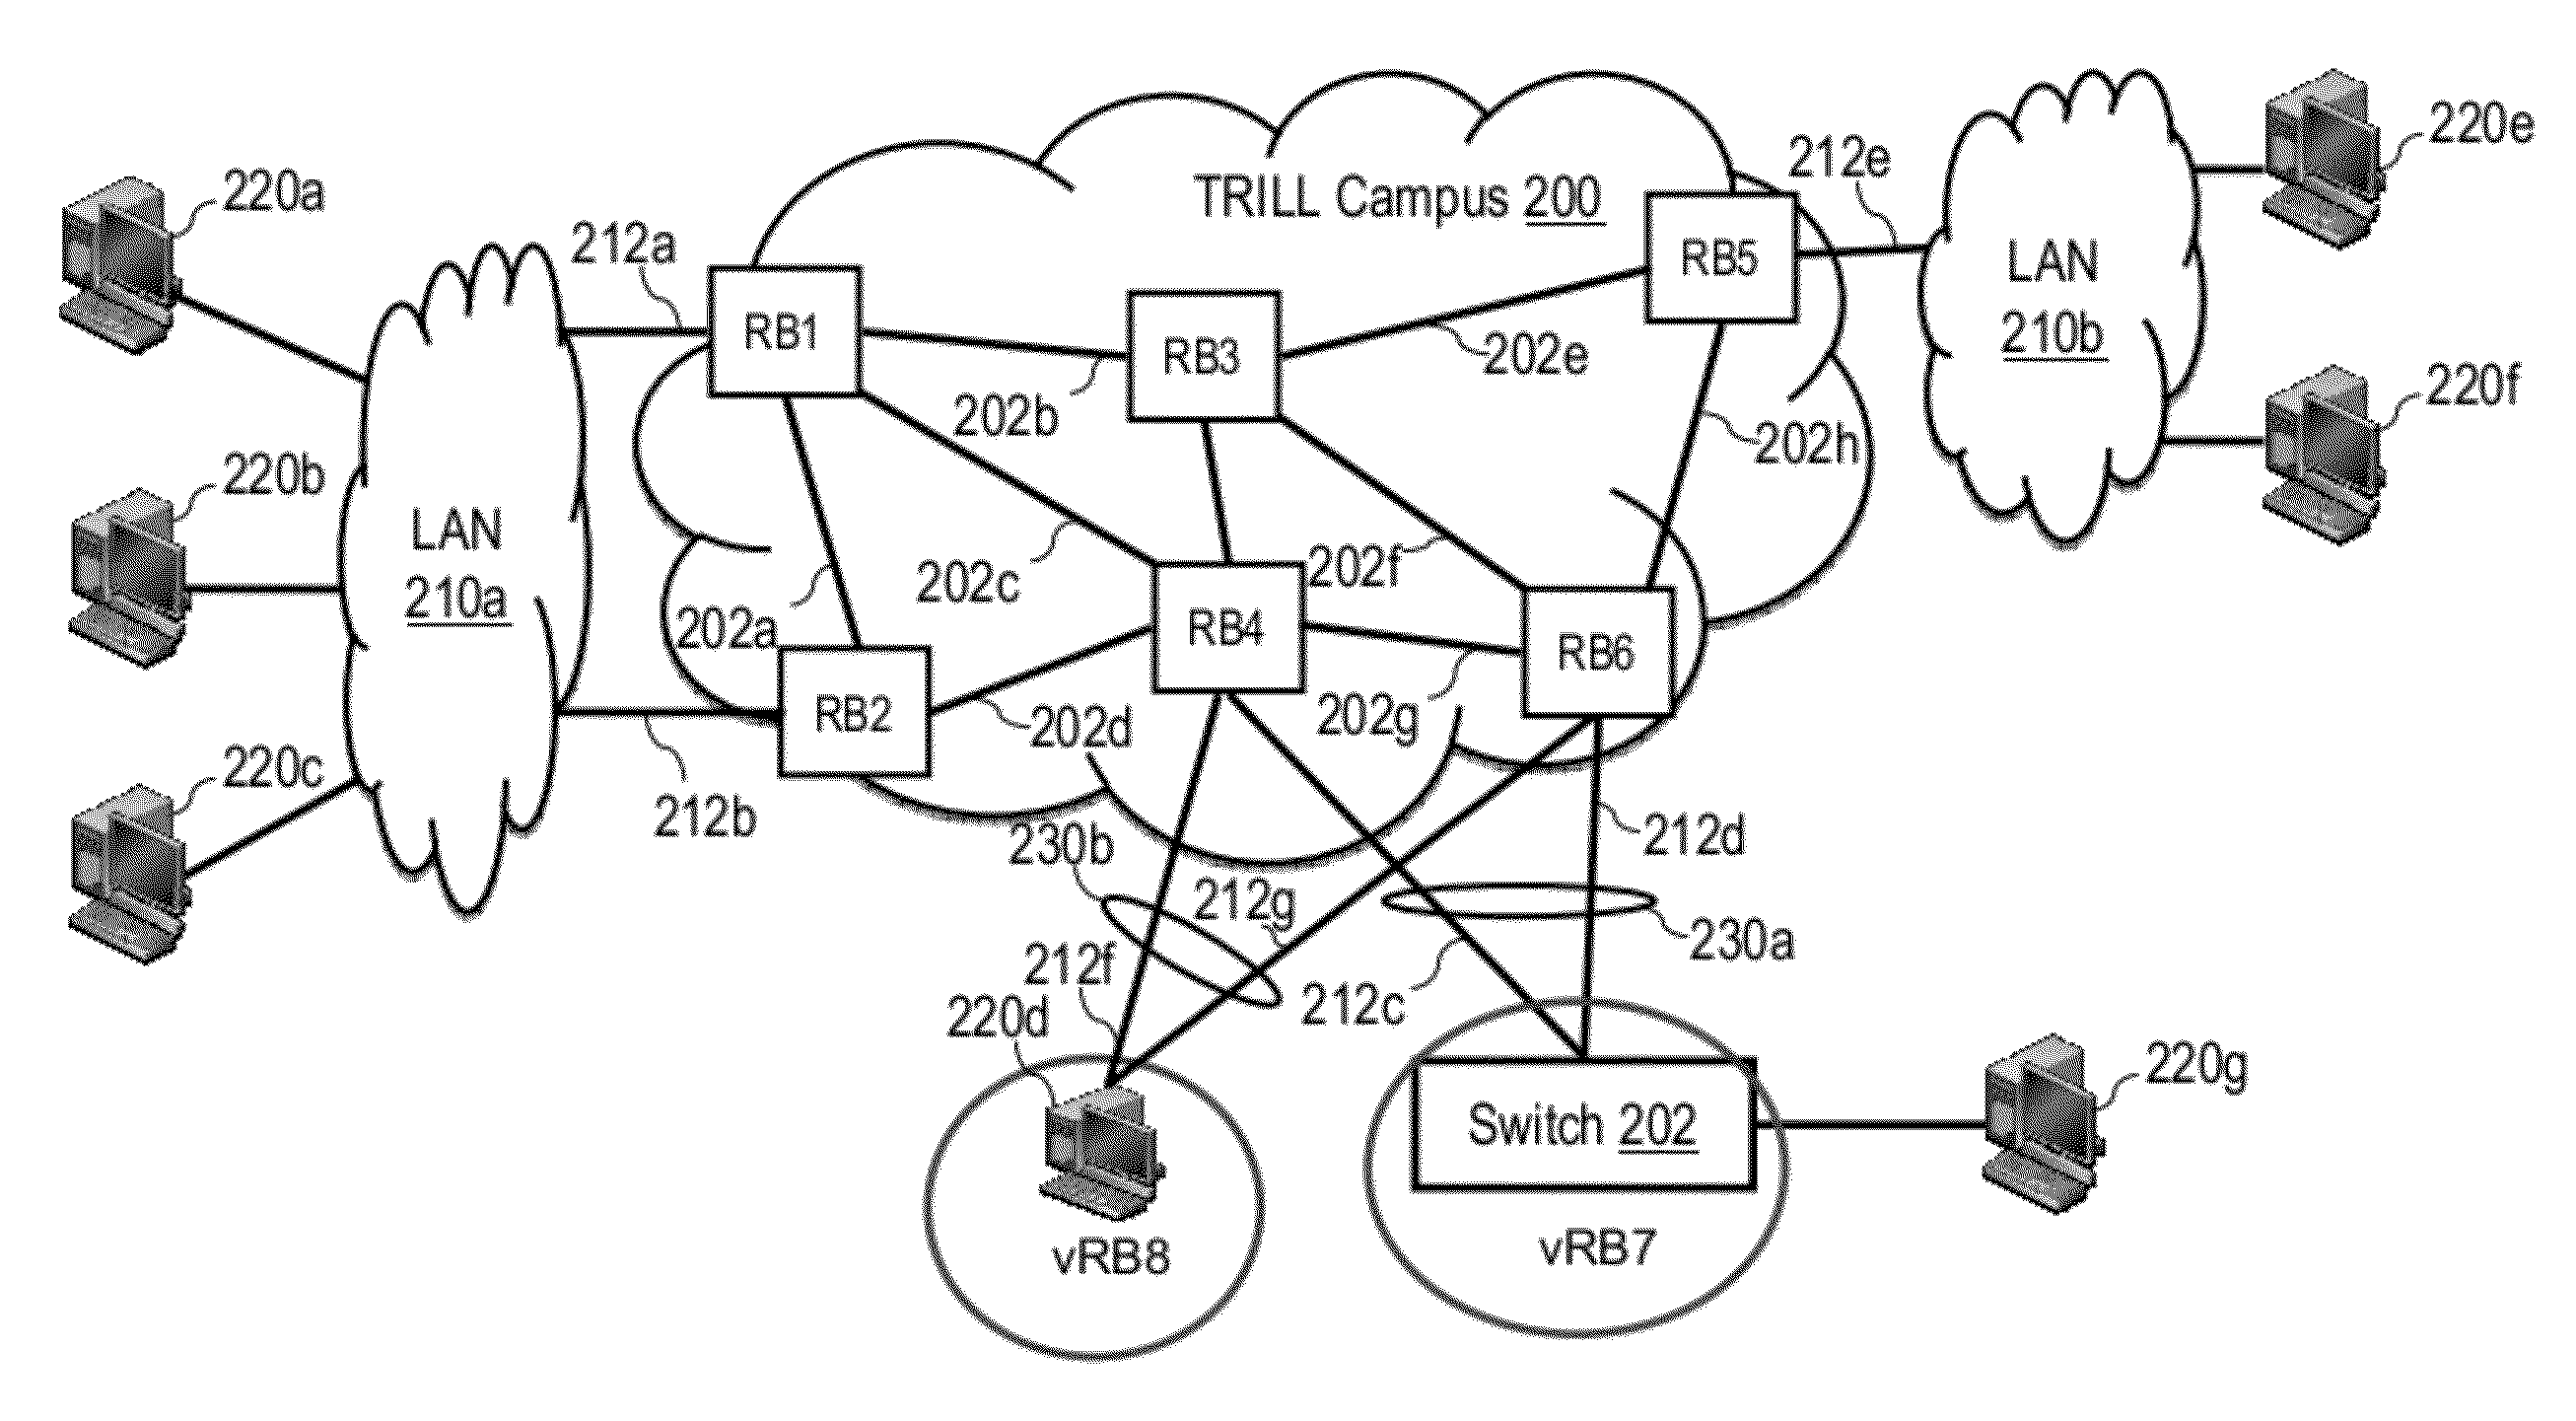 Mac Learning in a Trill Network